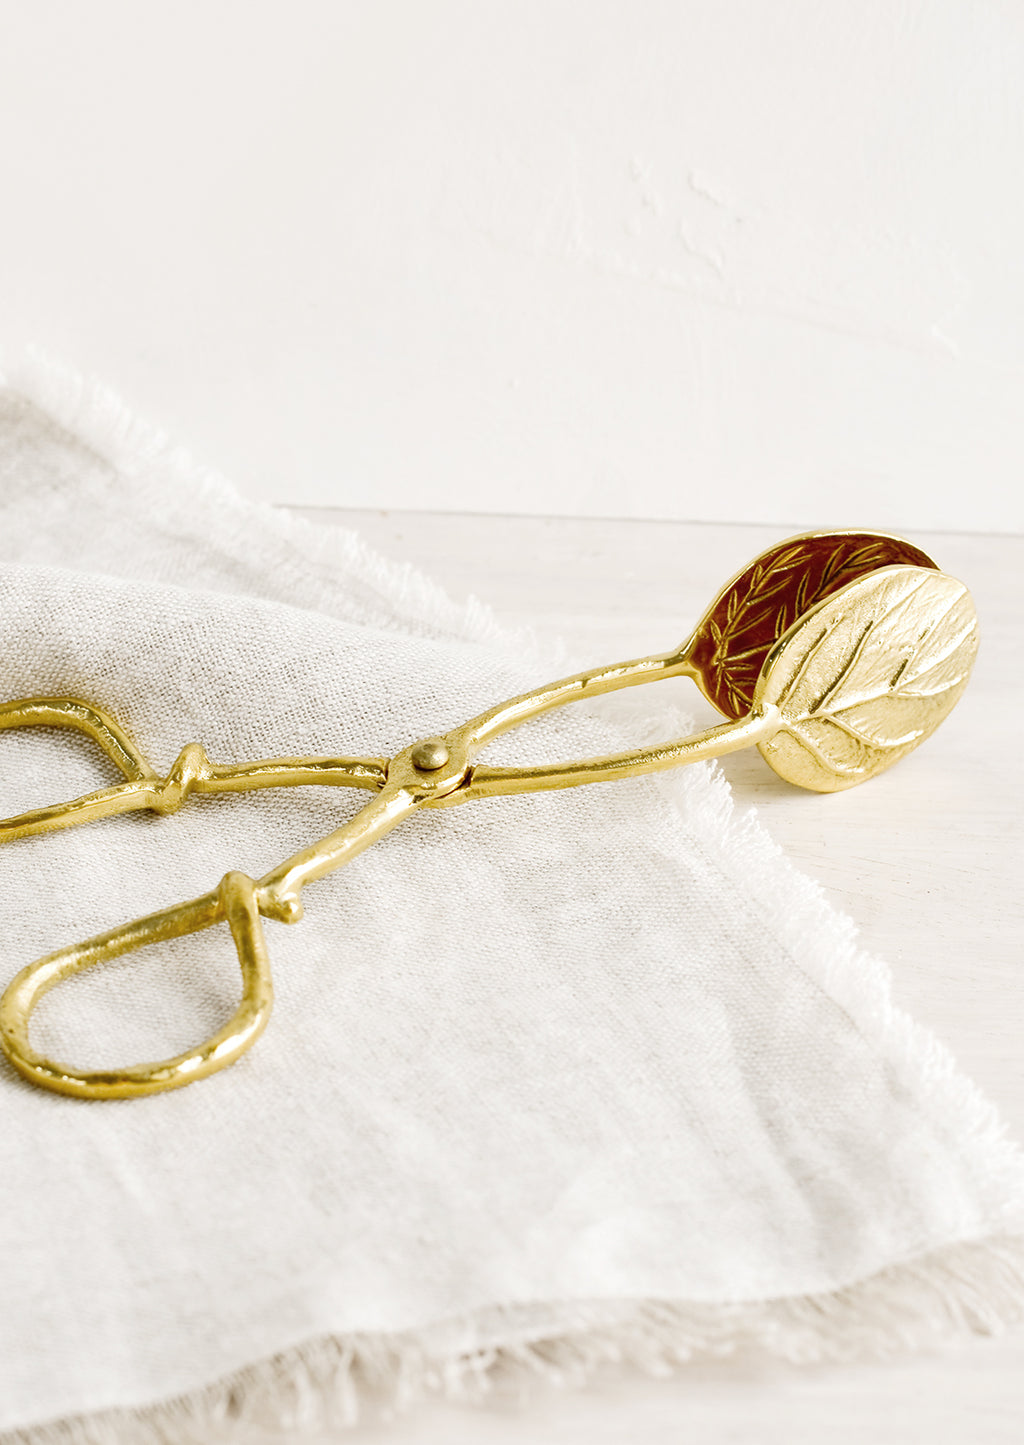 1: A pair of brass scissor-style serving tongs in leaf design.